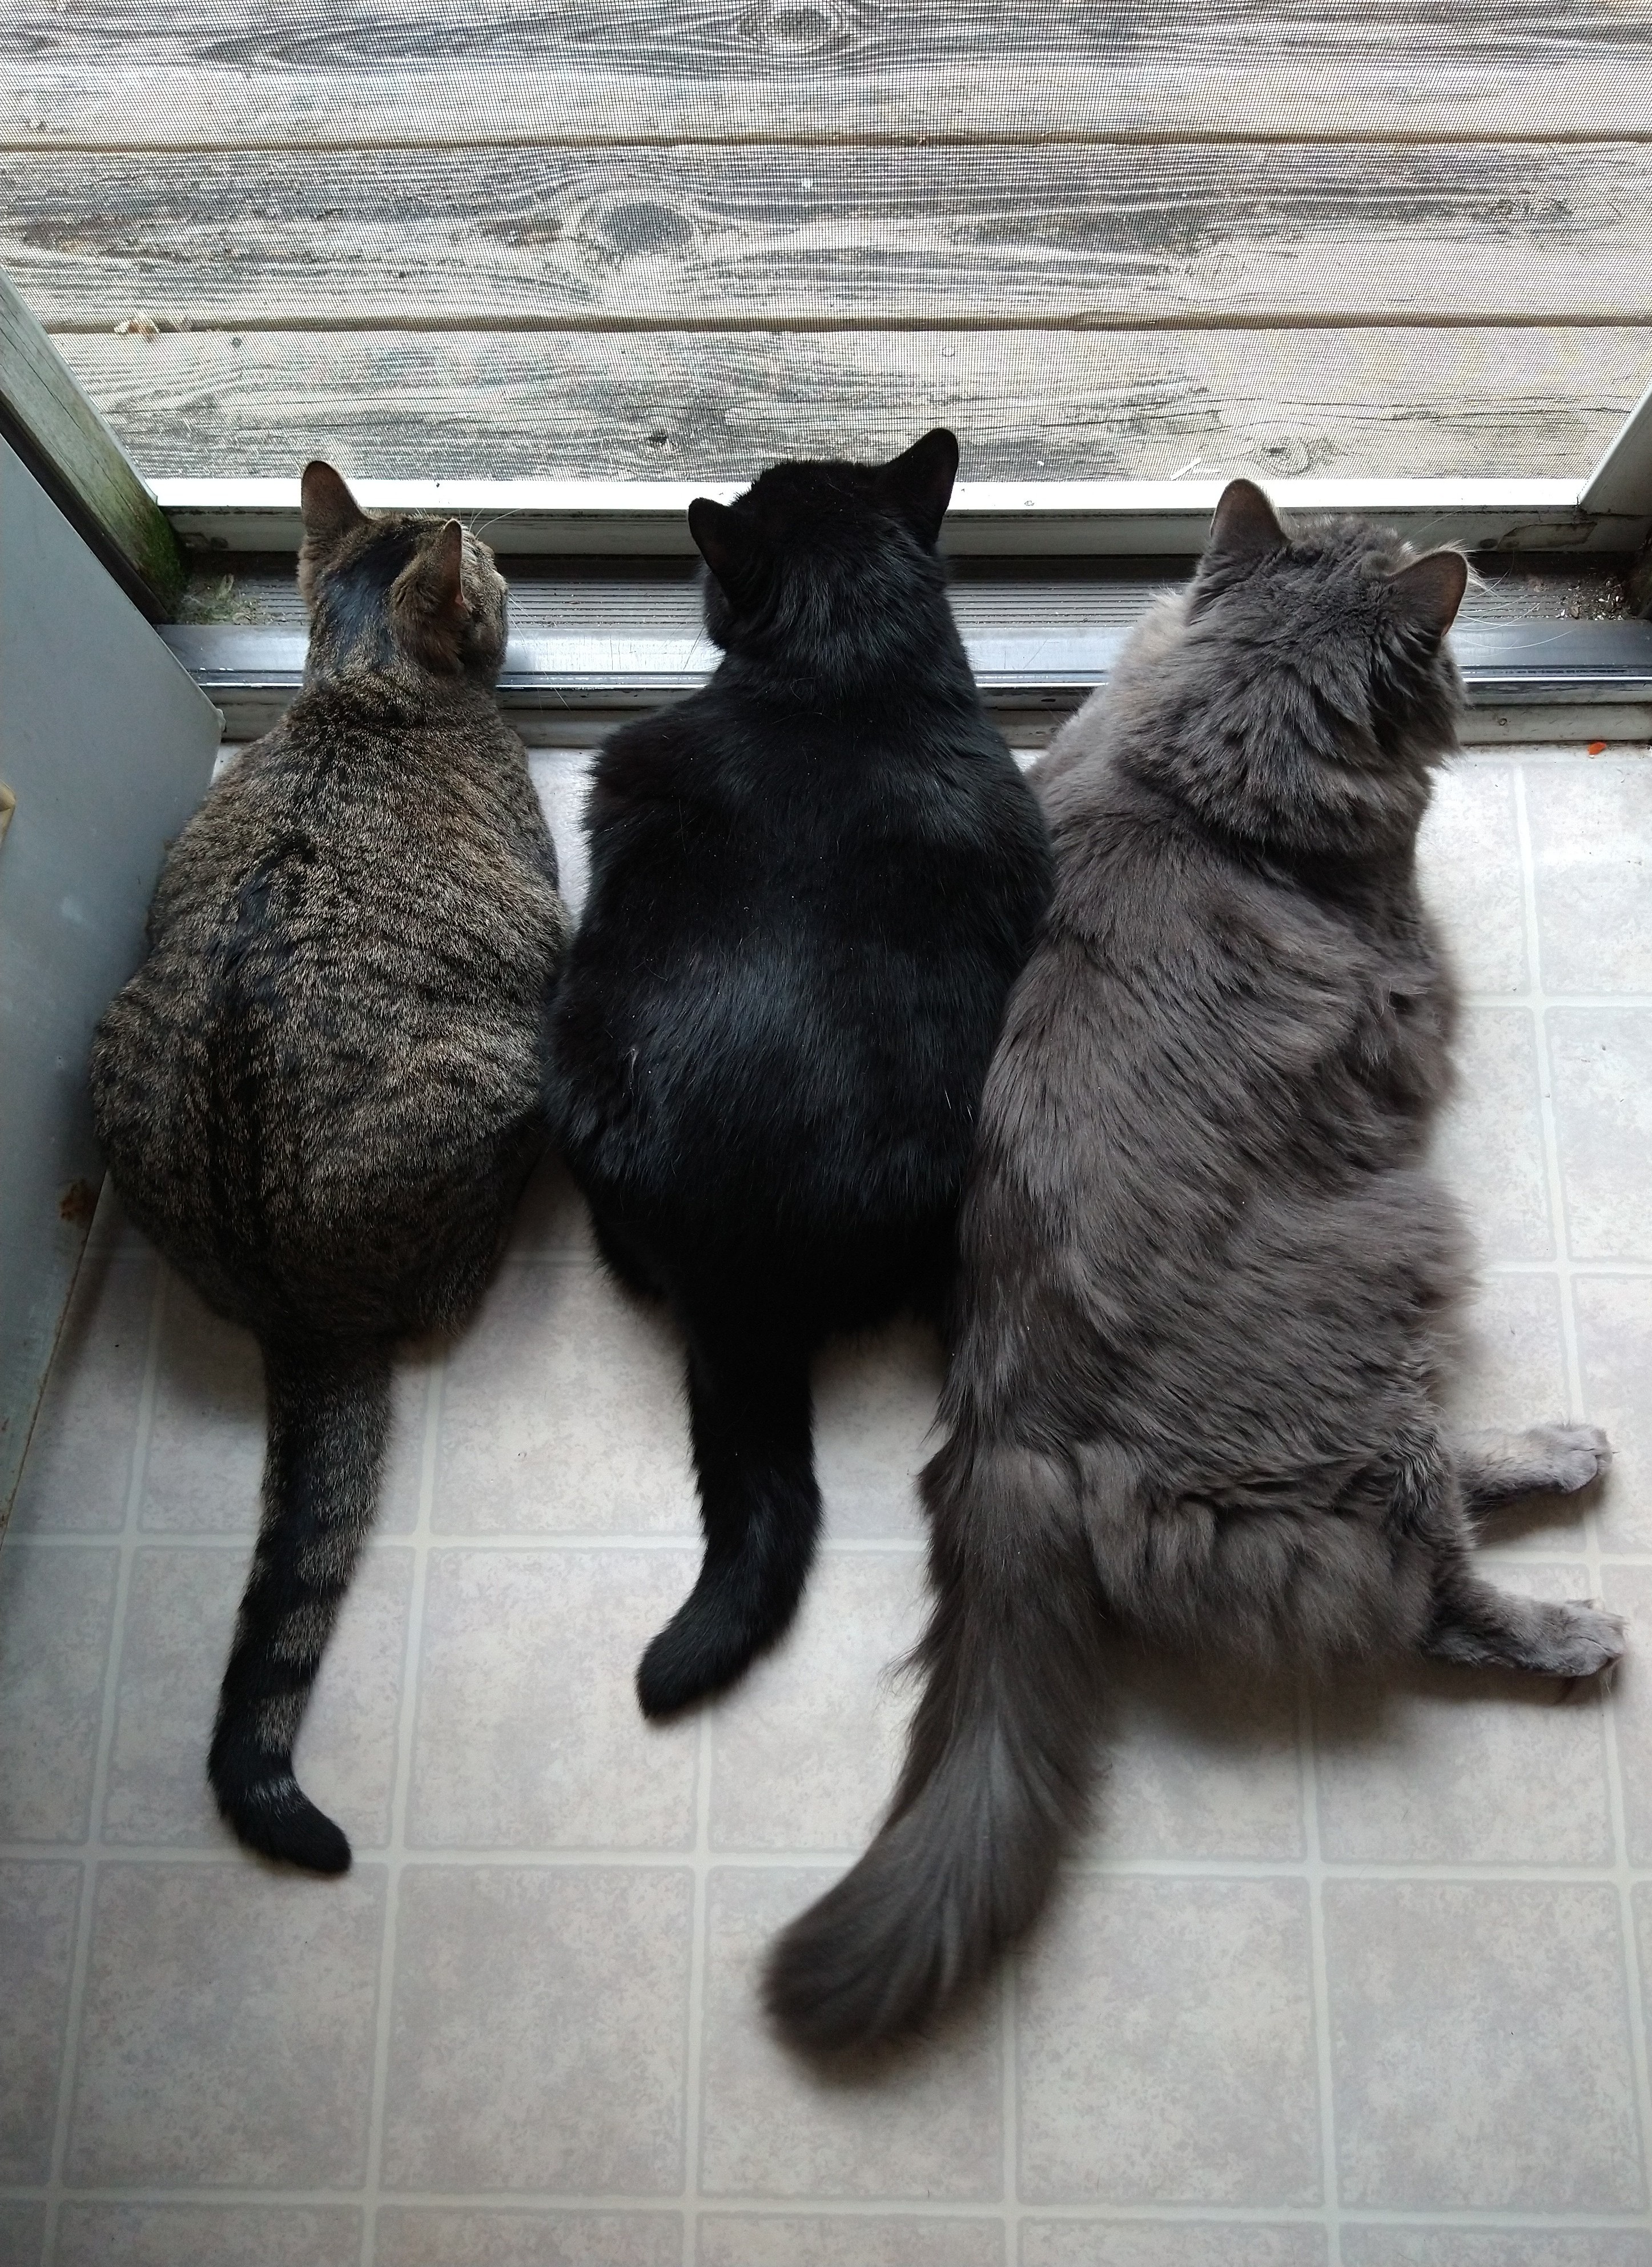 Evie, Shadow, and Moose